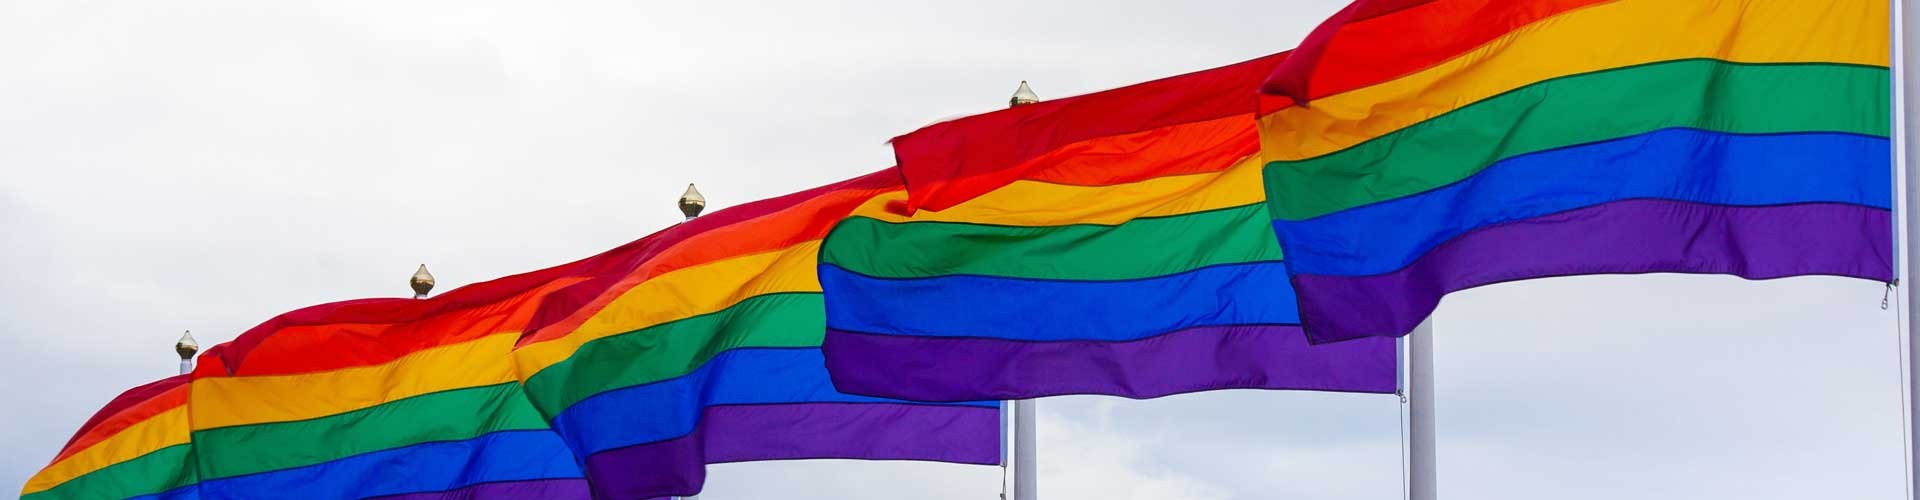 rainbow flags in the wind